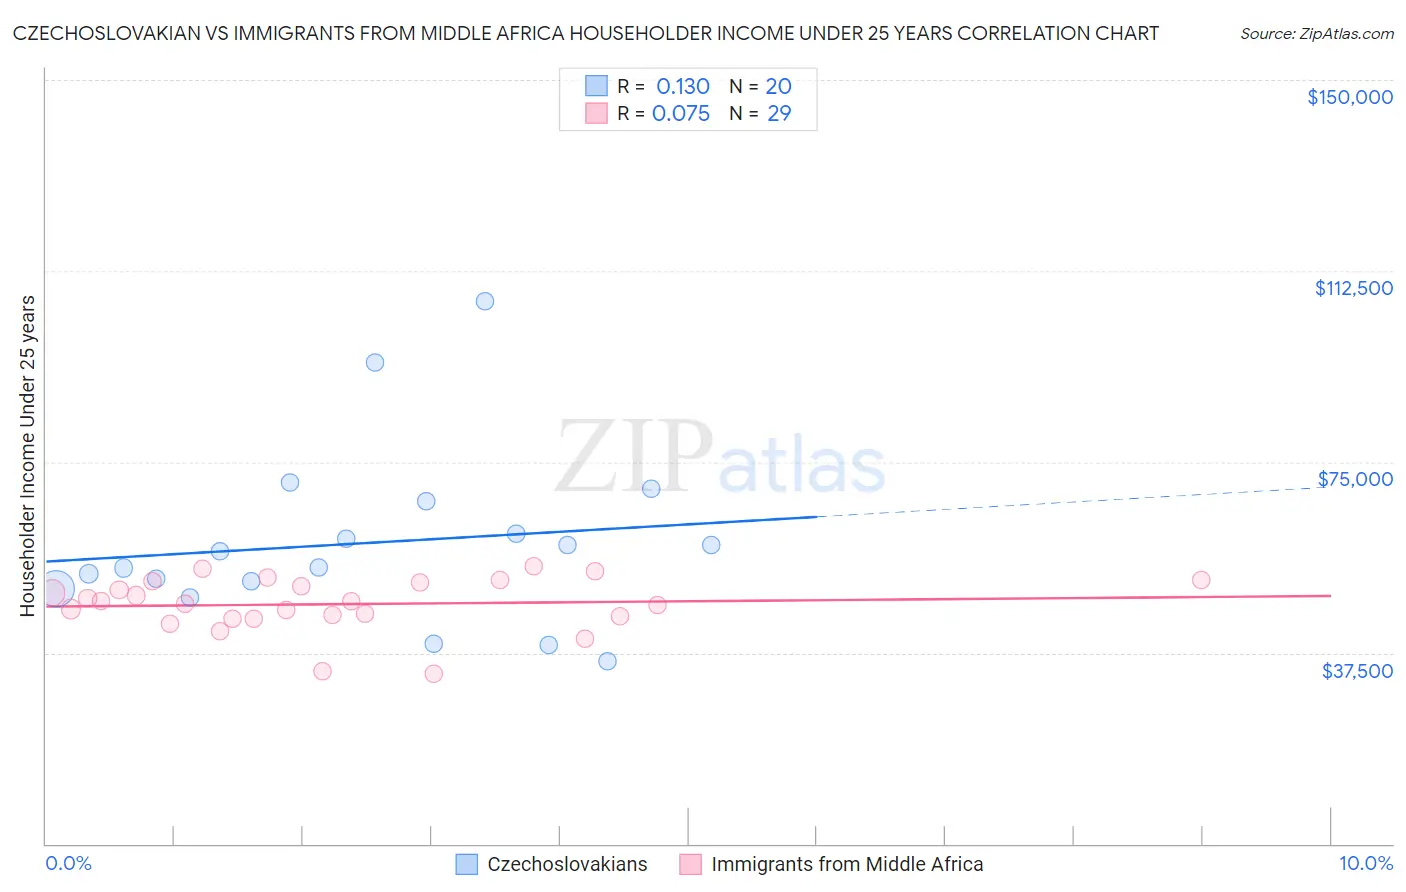 Czechoslovakian vs Immigrants from Middle Africa Householder Income Under 25 years